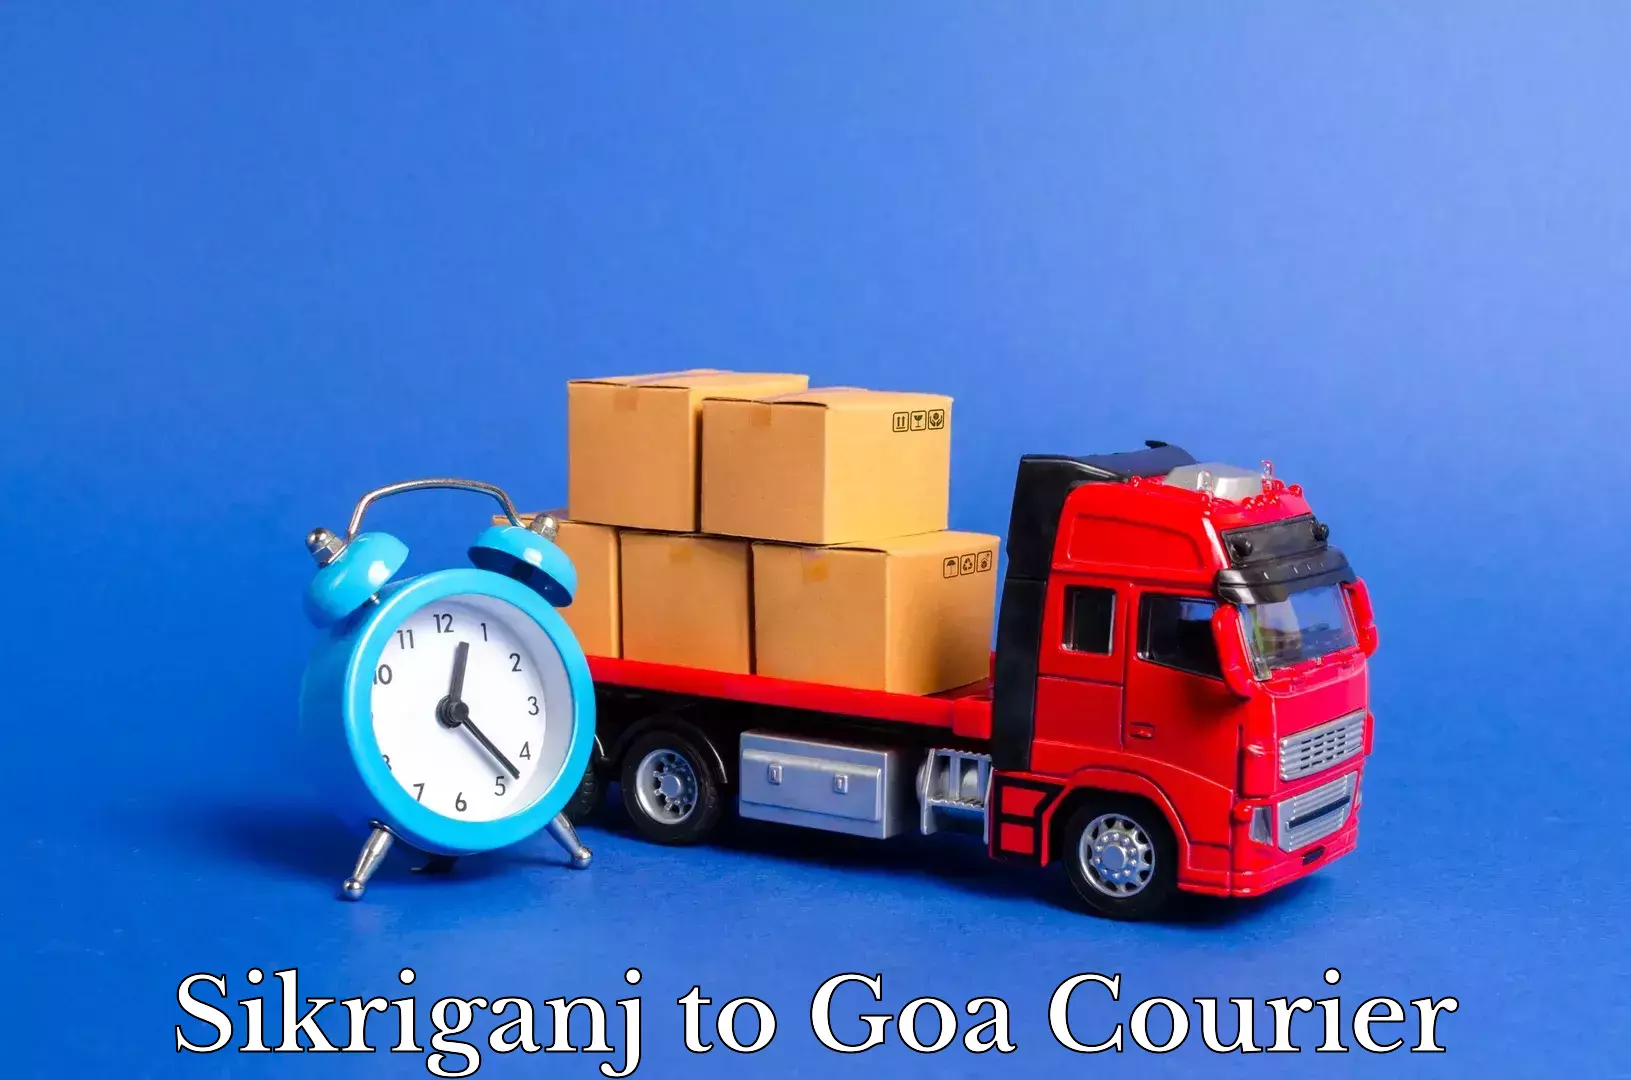 Quality relocation services Sikriganj to South Goa